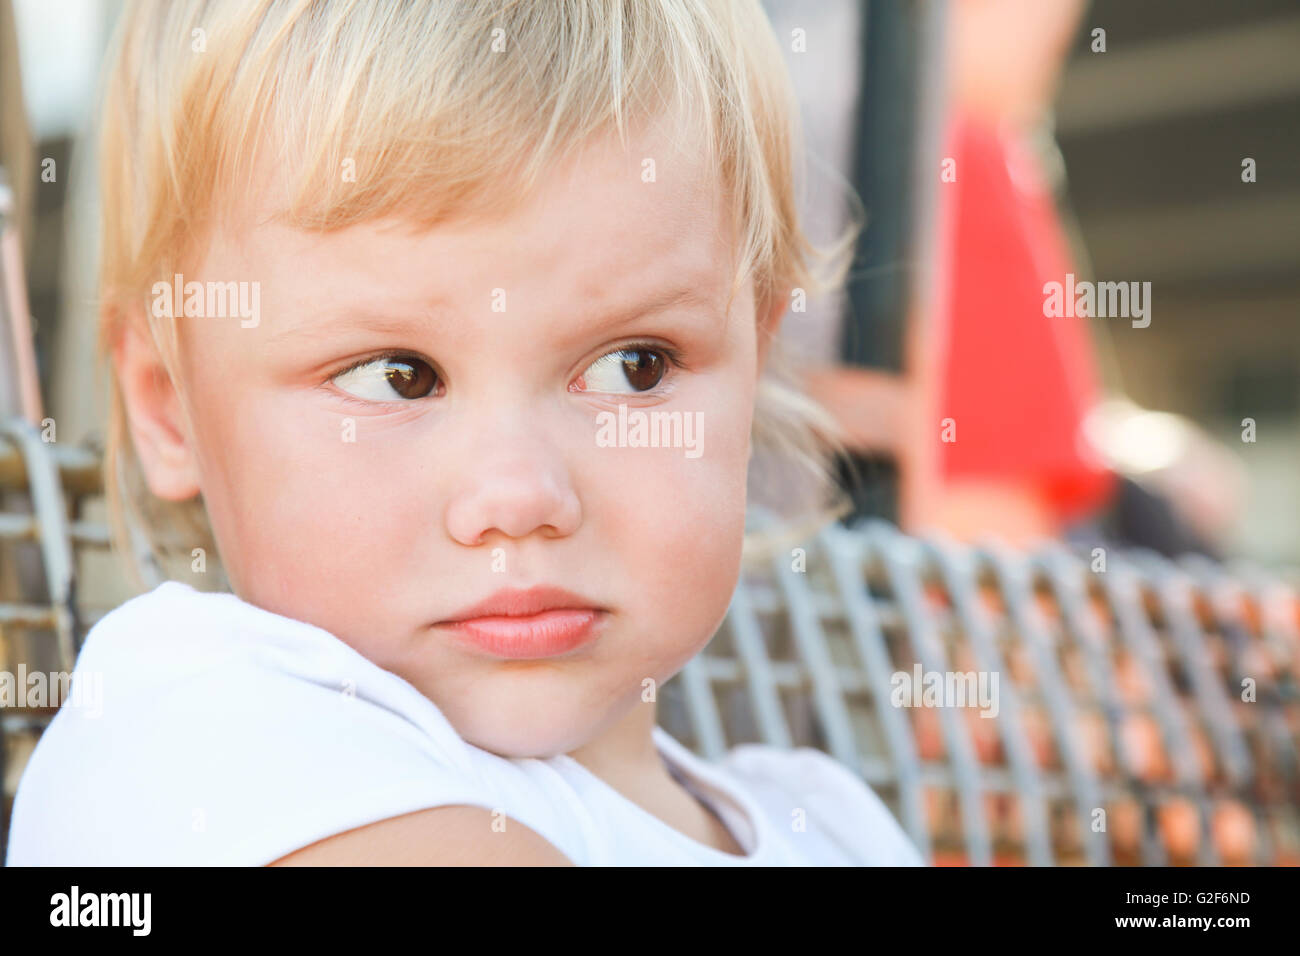 Outdoor closeup portrait of displeased cute Caucasian blond baby girl Stock Photo